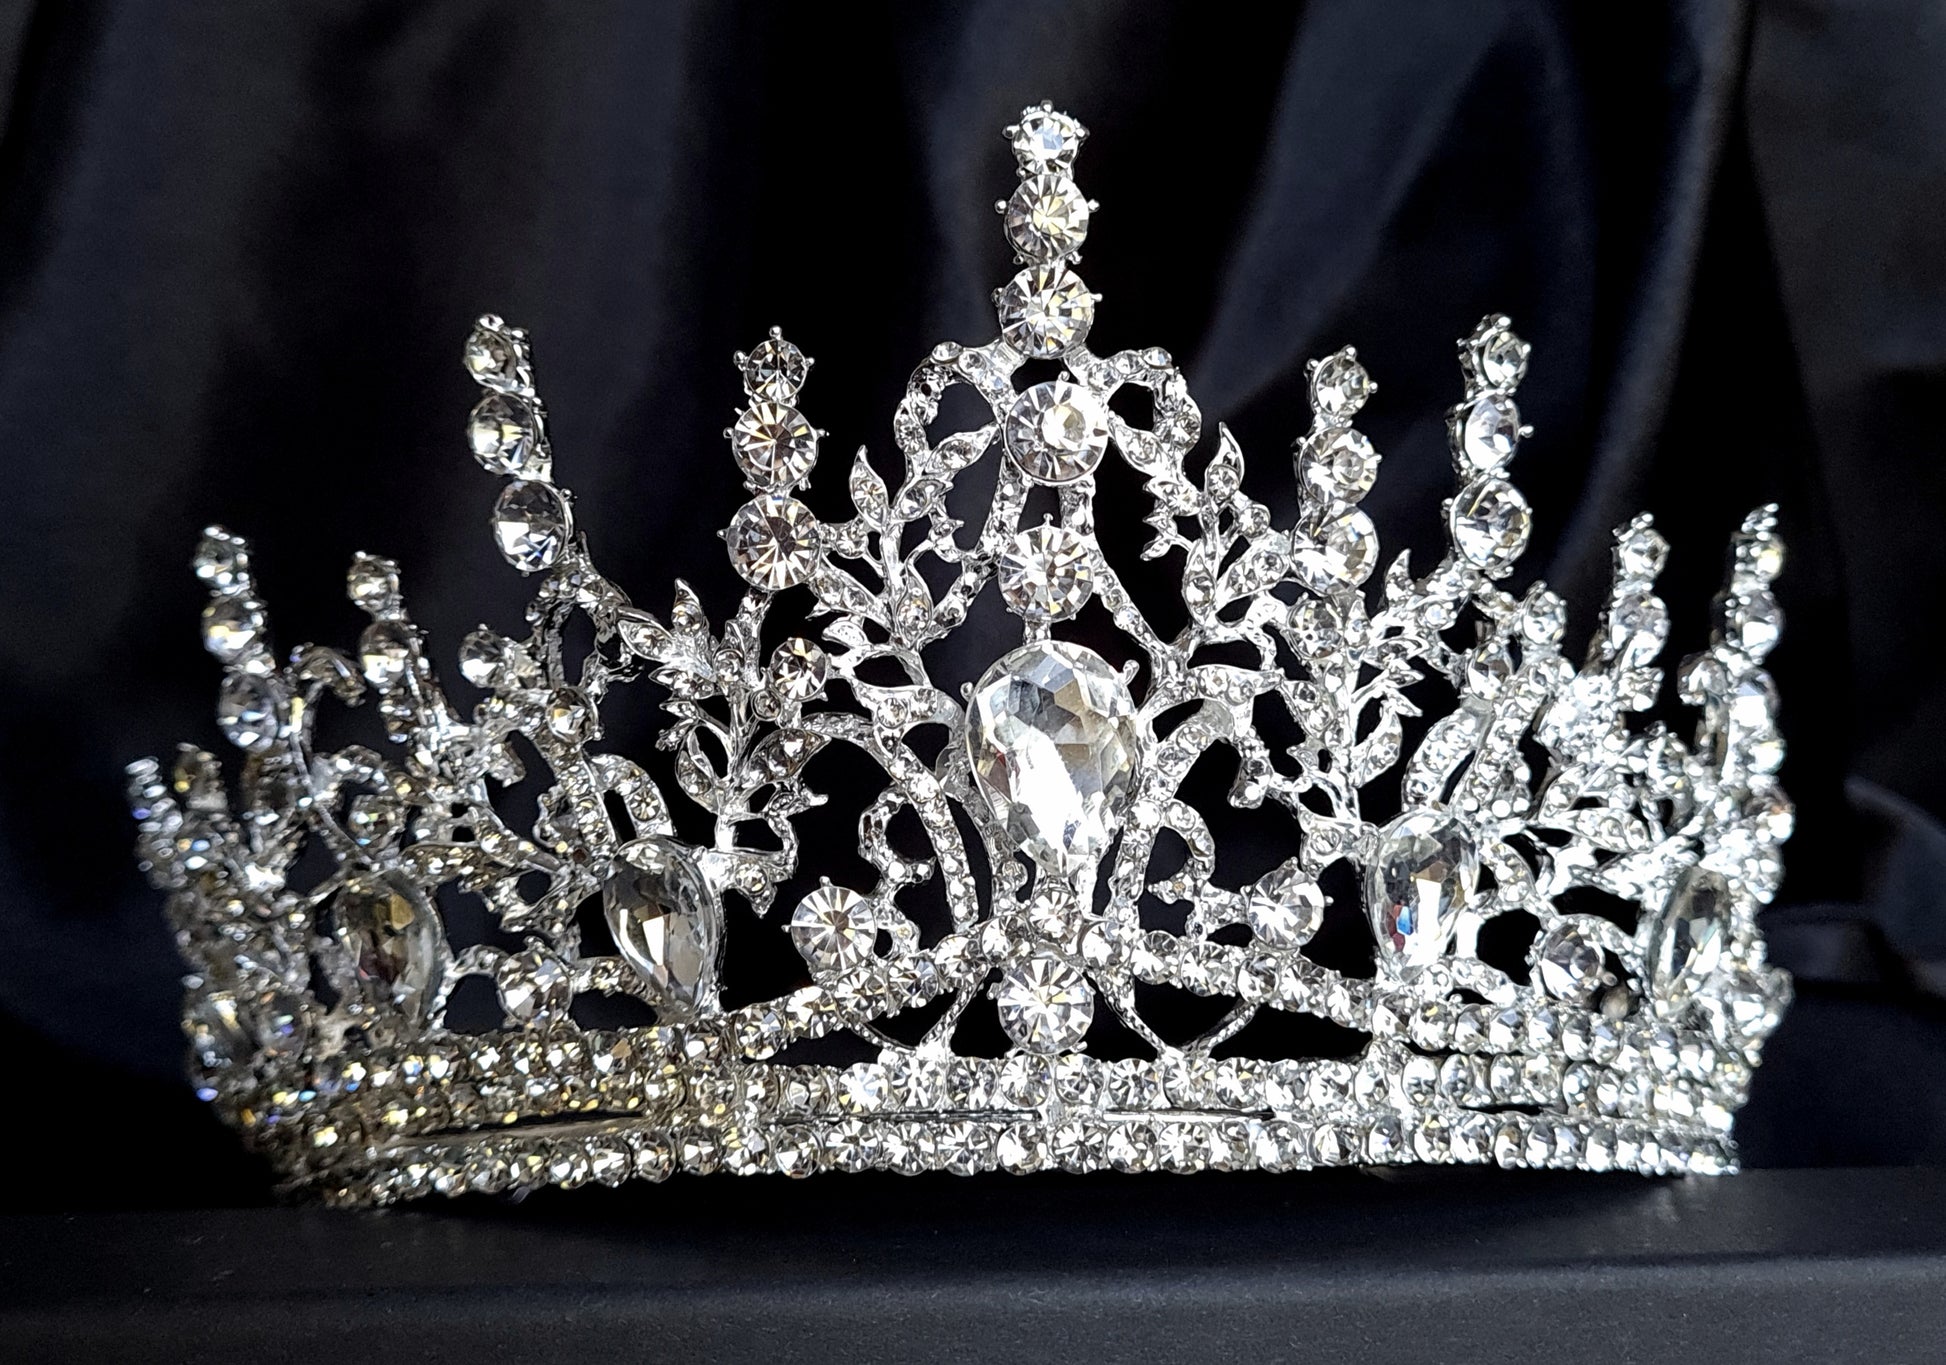  A close-up of a tiara with rhinestones on a black background. The tiara is made of silver and features a delicate design with cascading rhinestones. The rhinestones are clear and sparkling. 